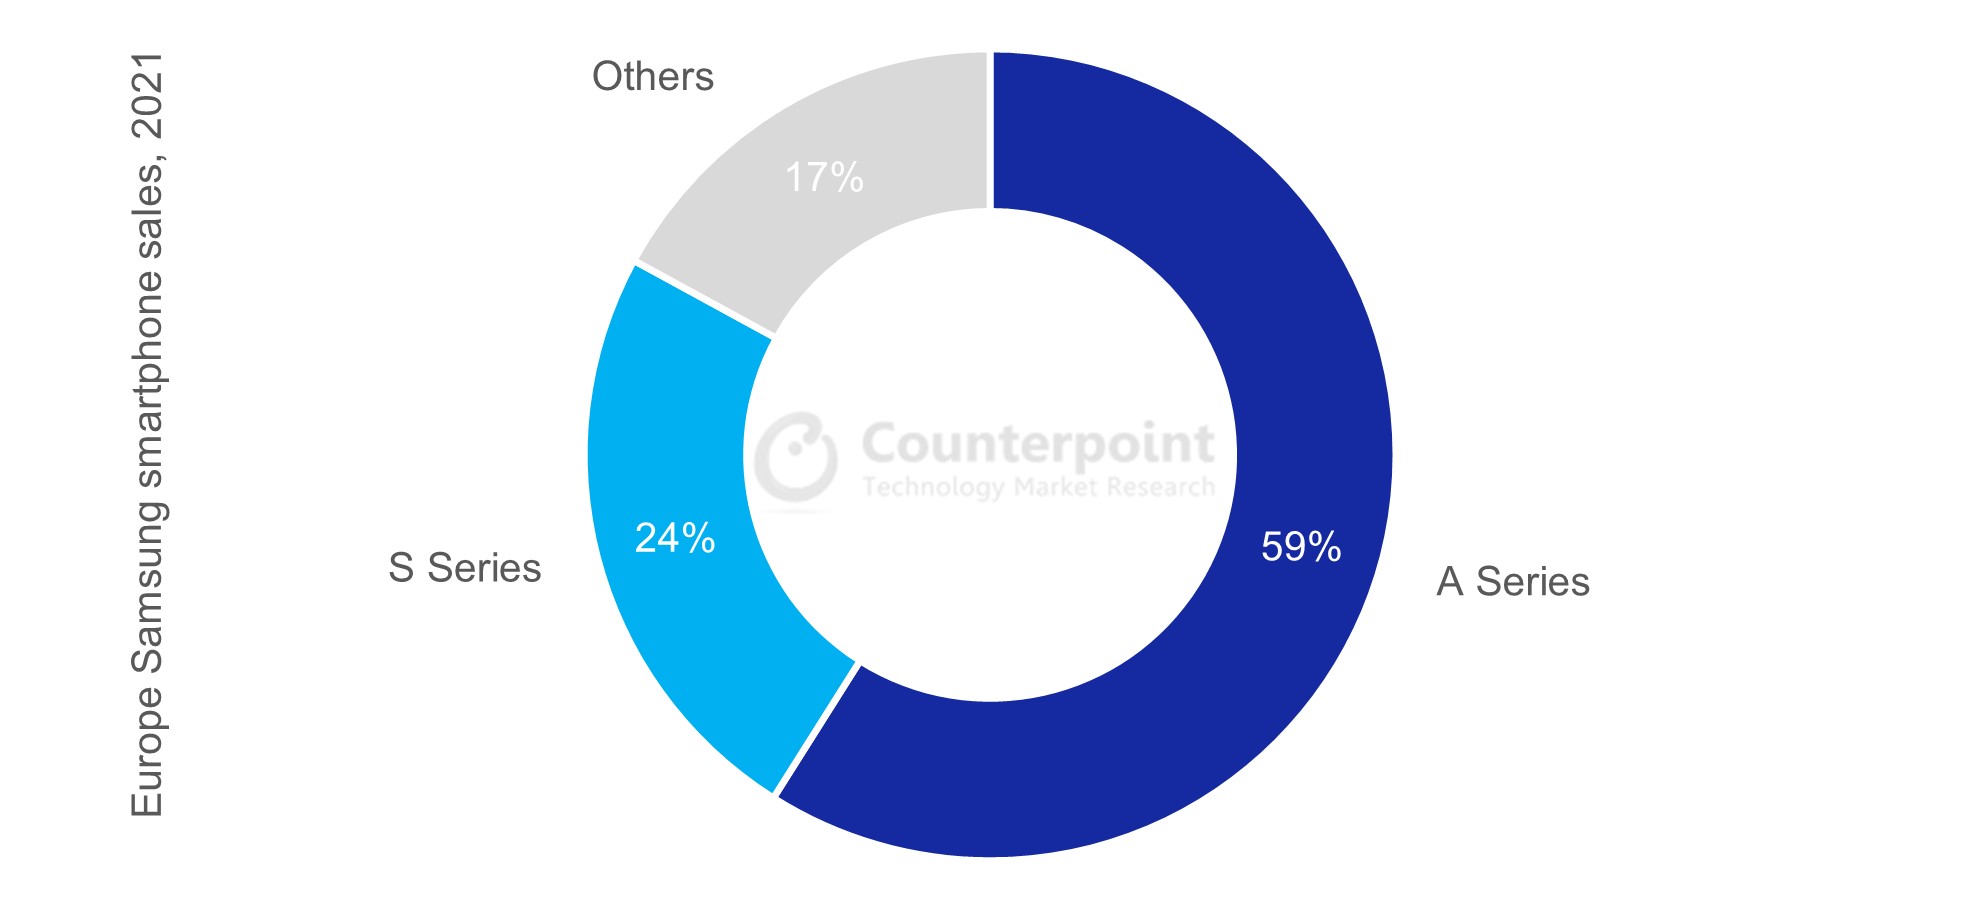 Counterpoint Research: The Samsung A Series dominates Samsung’s European smartphone sales